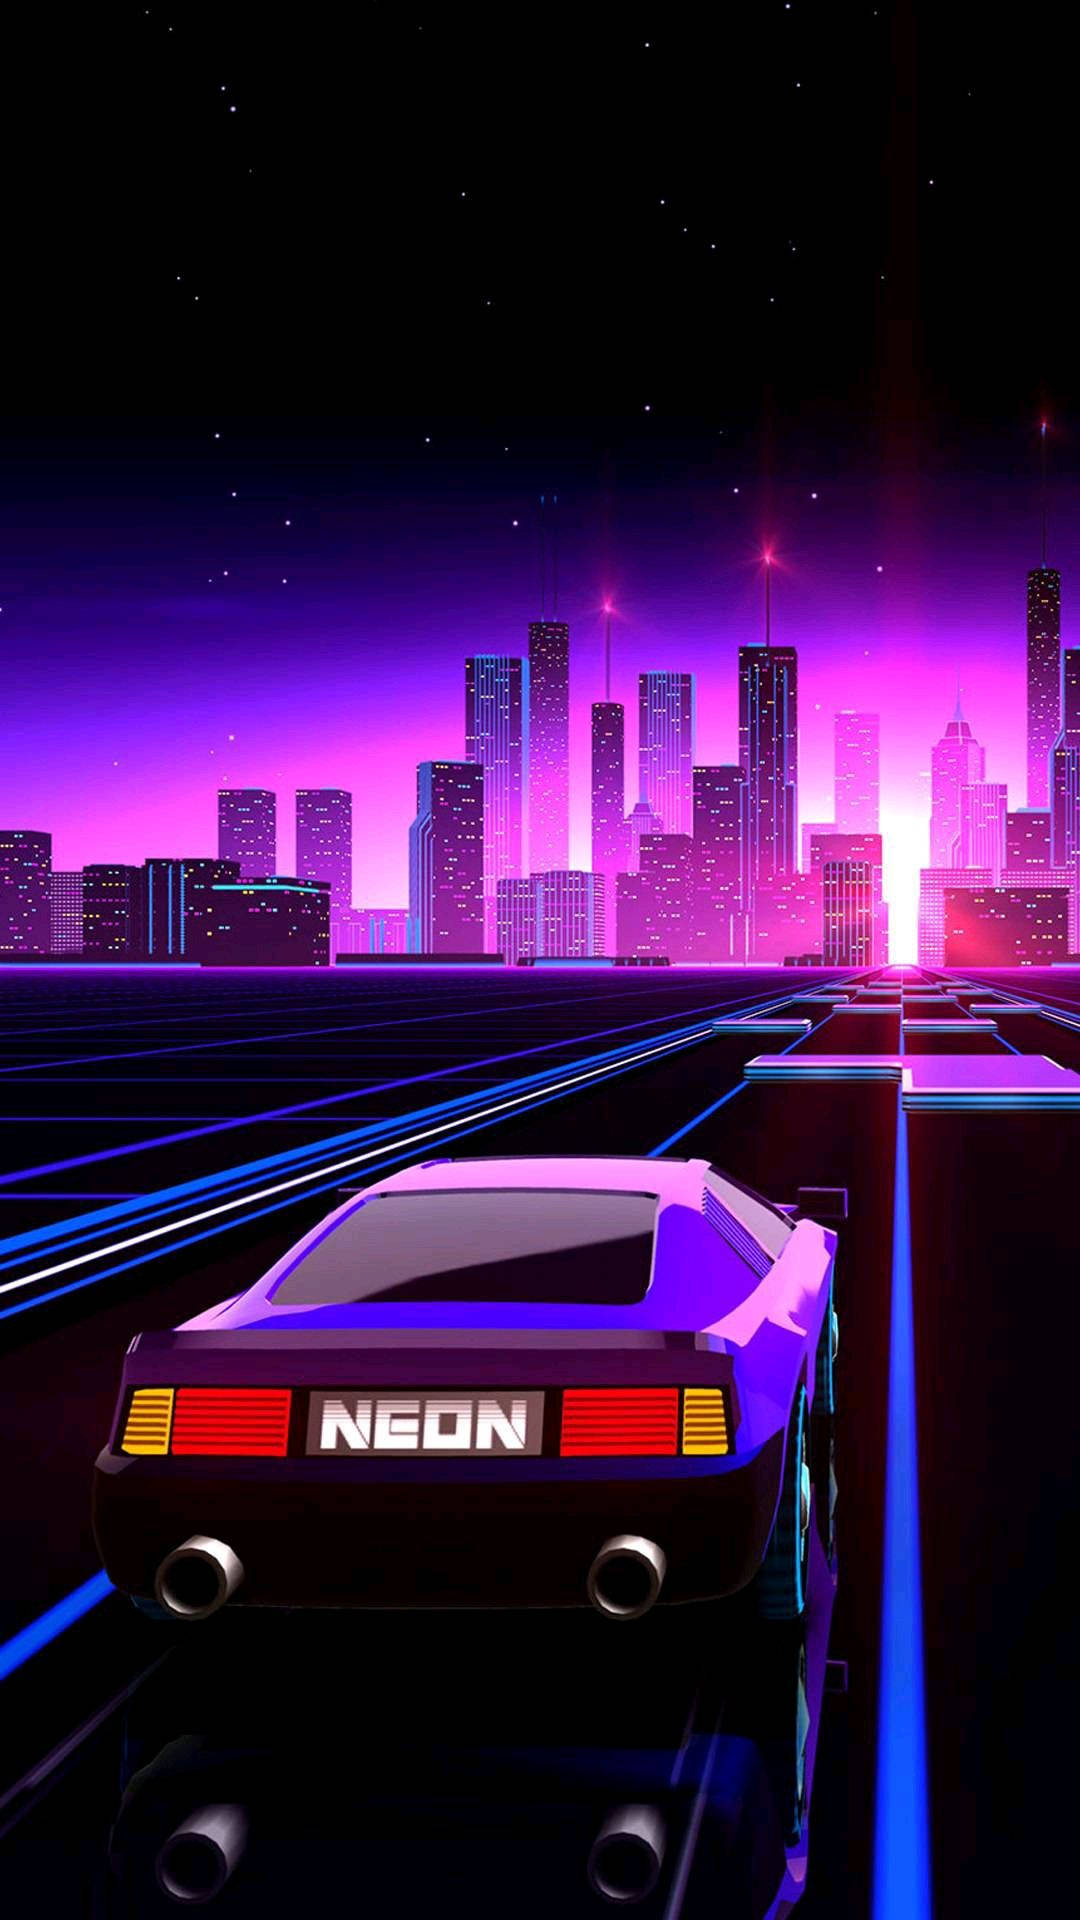 Aesthetic Retro Car And City Background